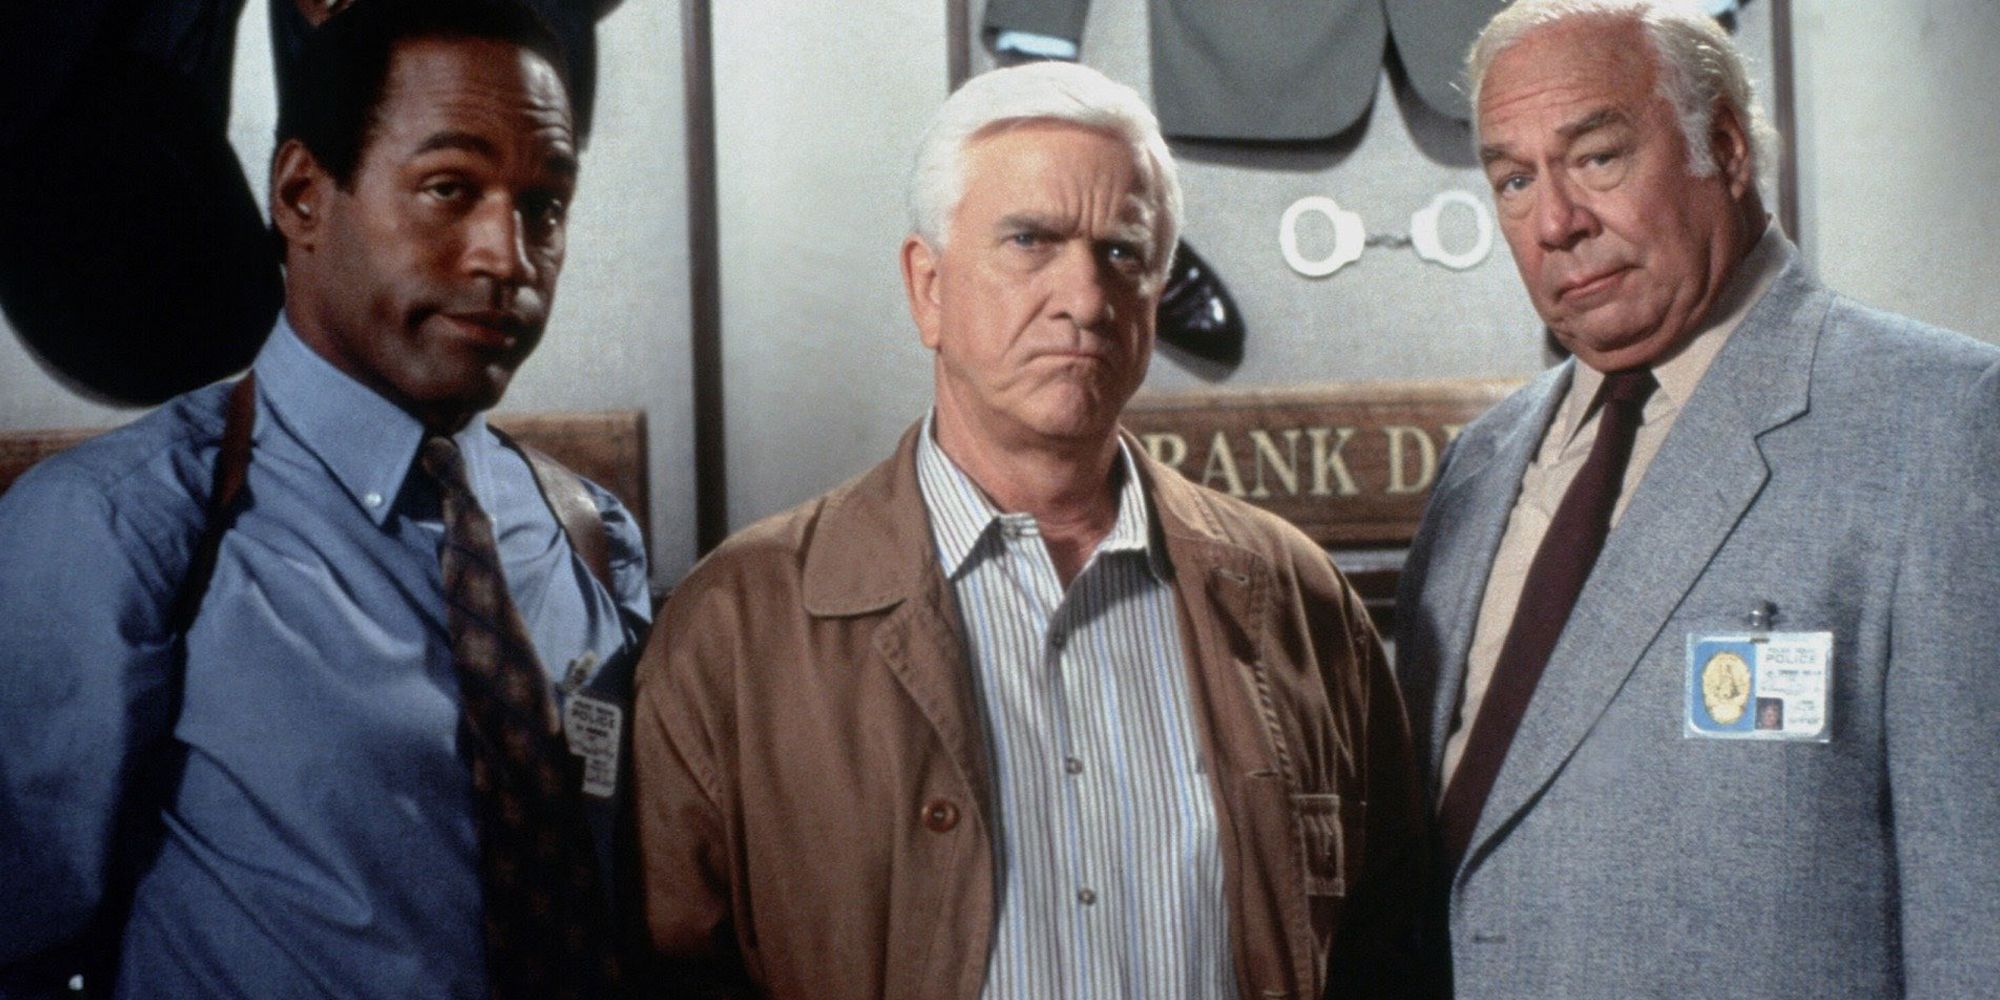 close up of Nordberg (OJ Simpson), Frank Drebin (Leslie Nielsen) and Ed Holden (George Kennedy) from The Naked Gun